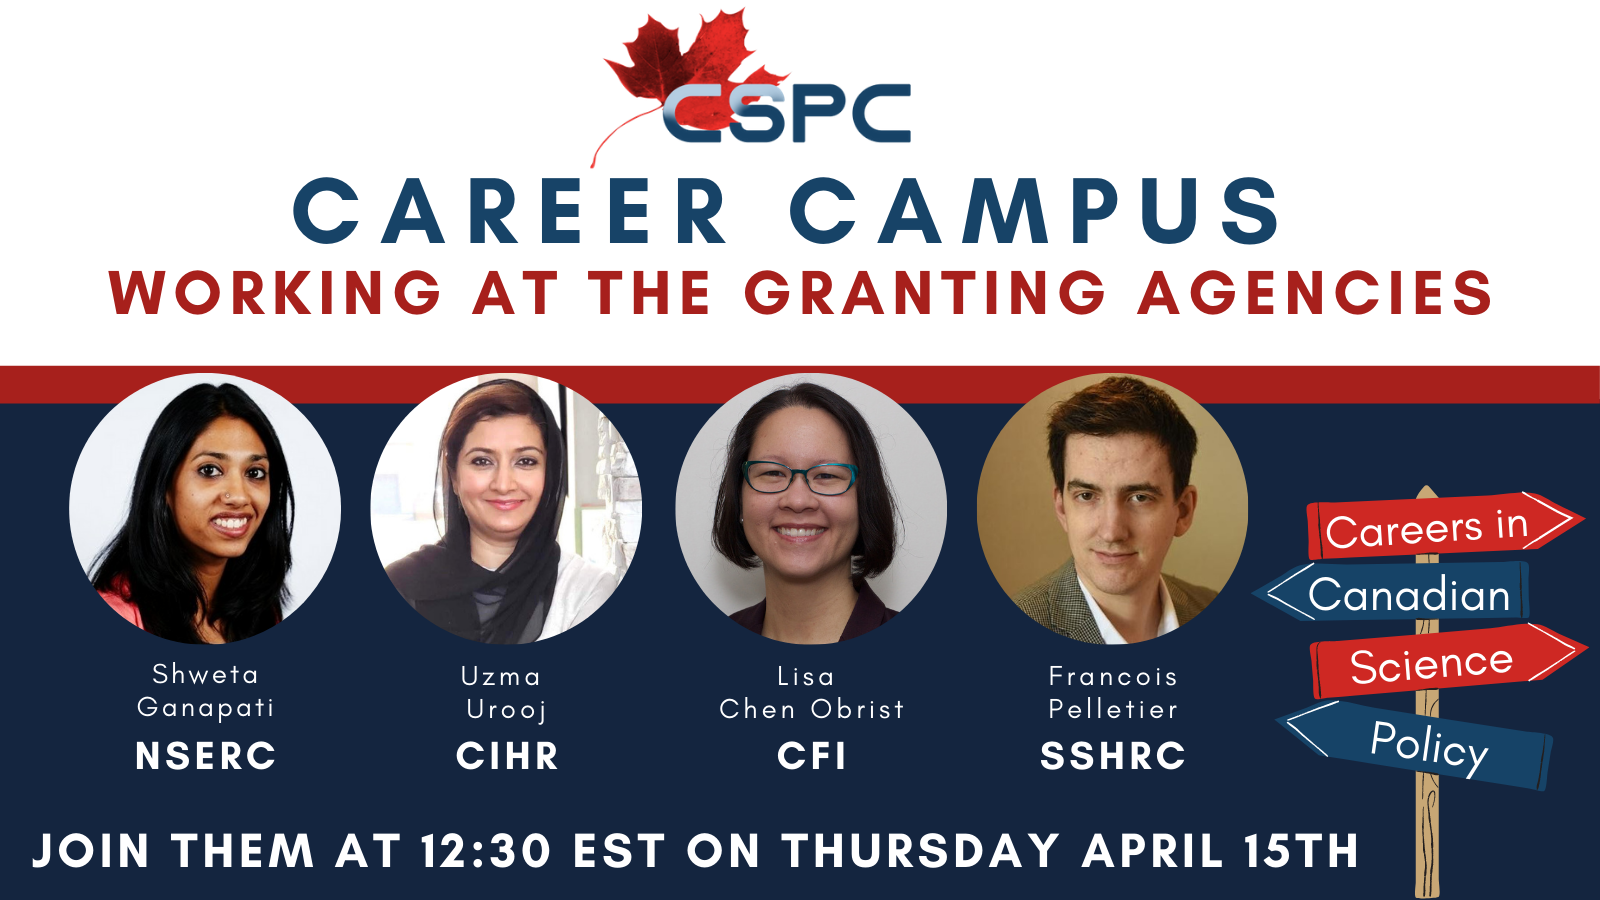 CSPC Career Campus Working at the Granting Agencies featuring Shweta Ganapati(NSERC), Uzma Urouj (CIHR) Lisa Chen Obrist (CFI) and Francois Pelletier (SSHRC). Join them at 12:30 on Thursday April 15th